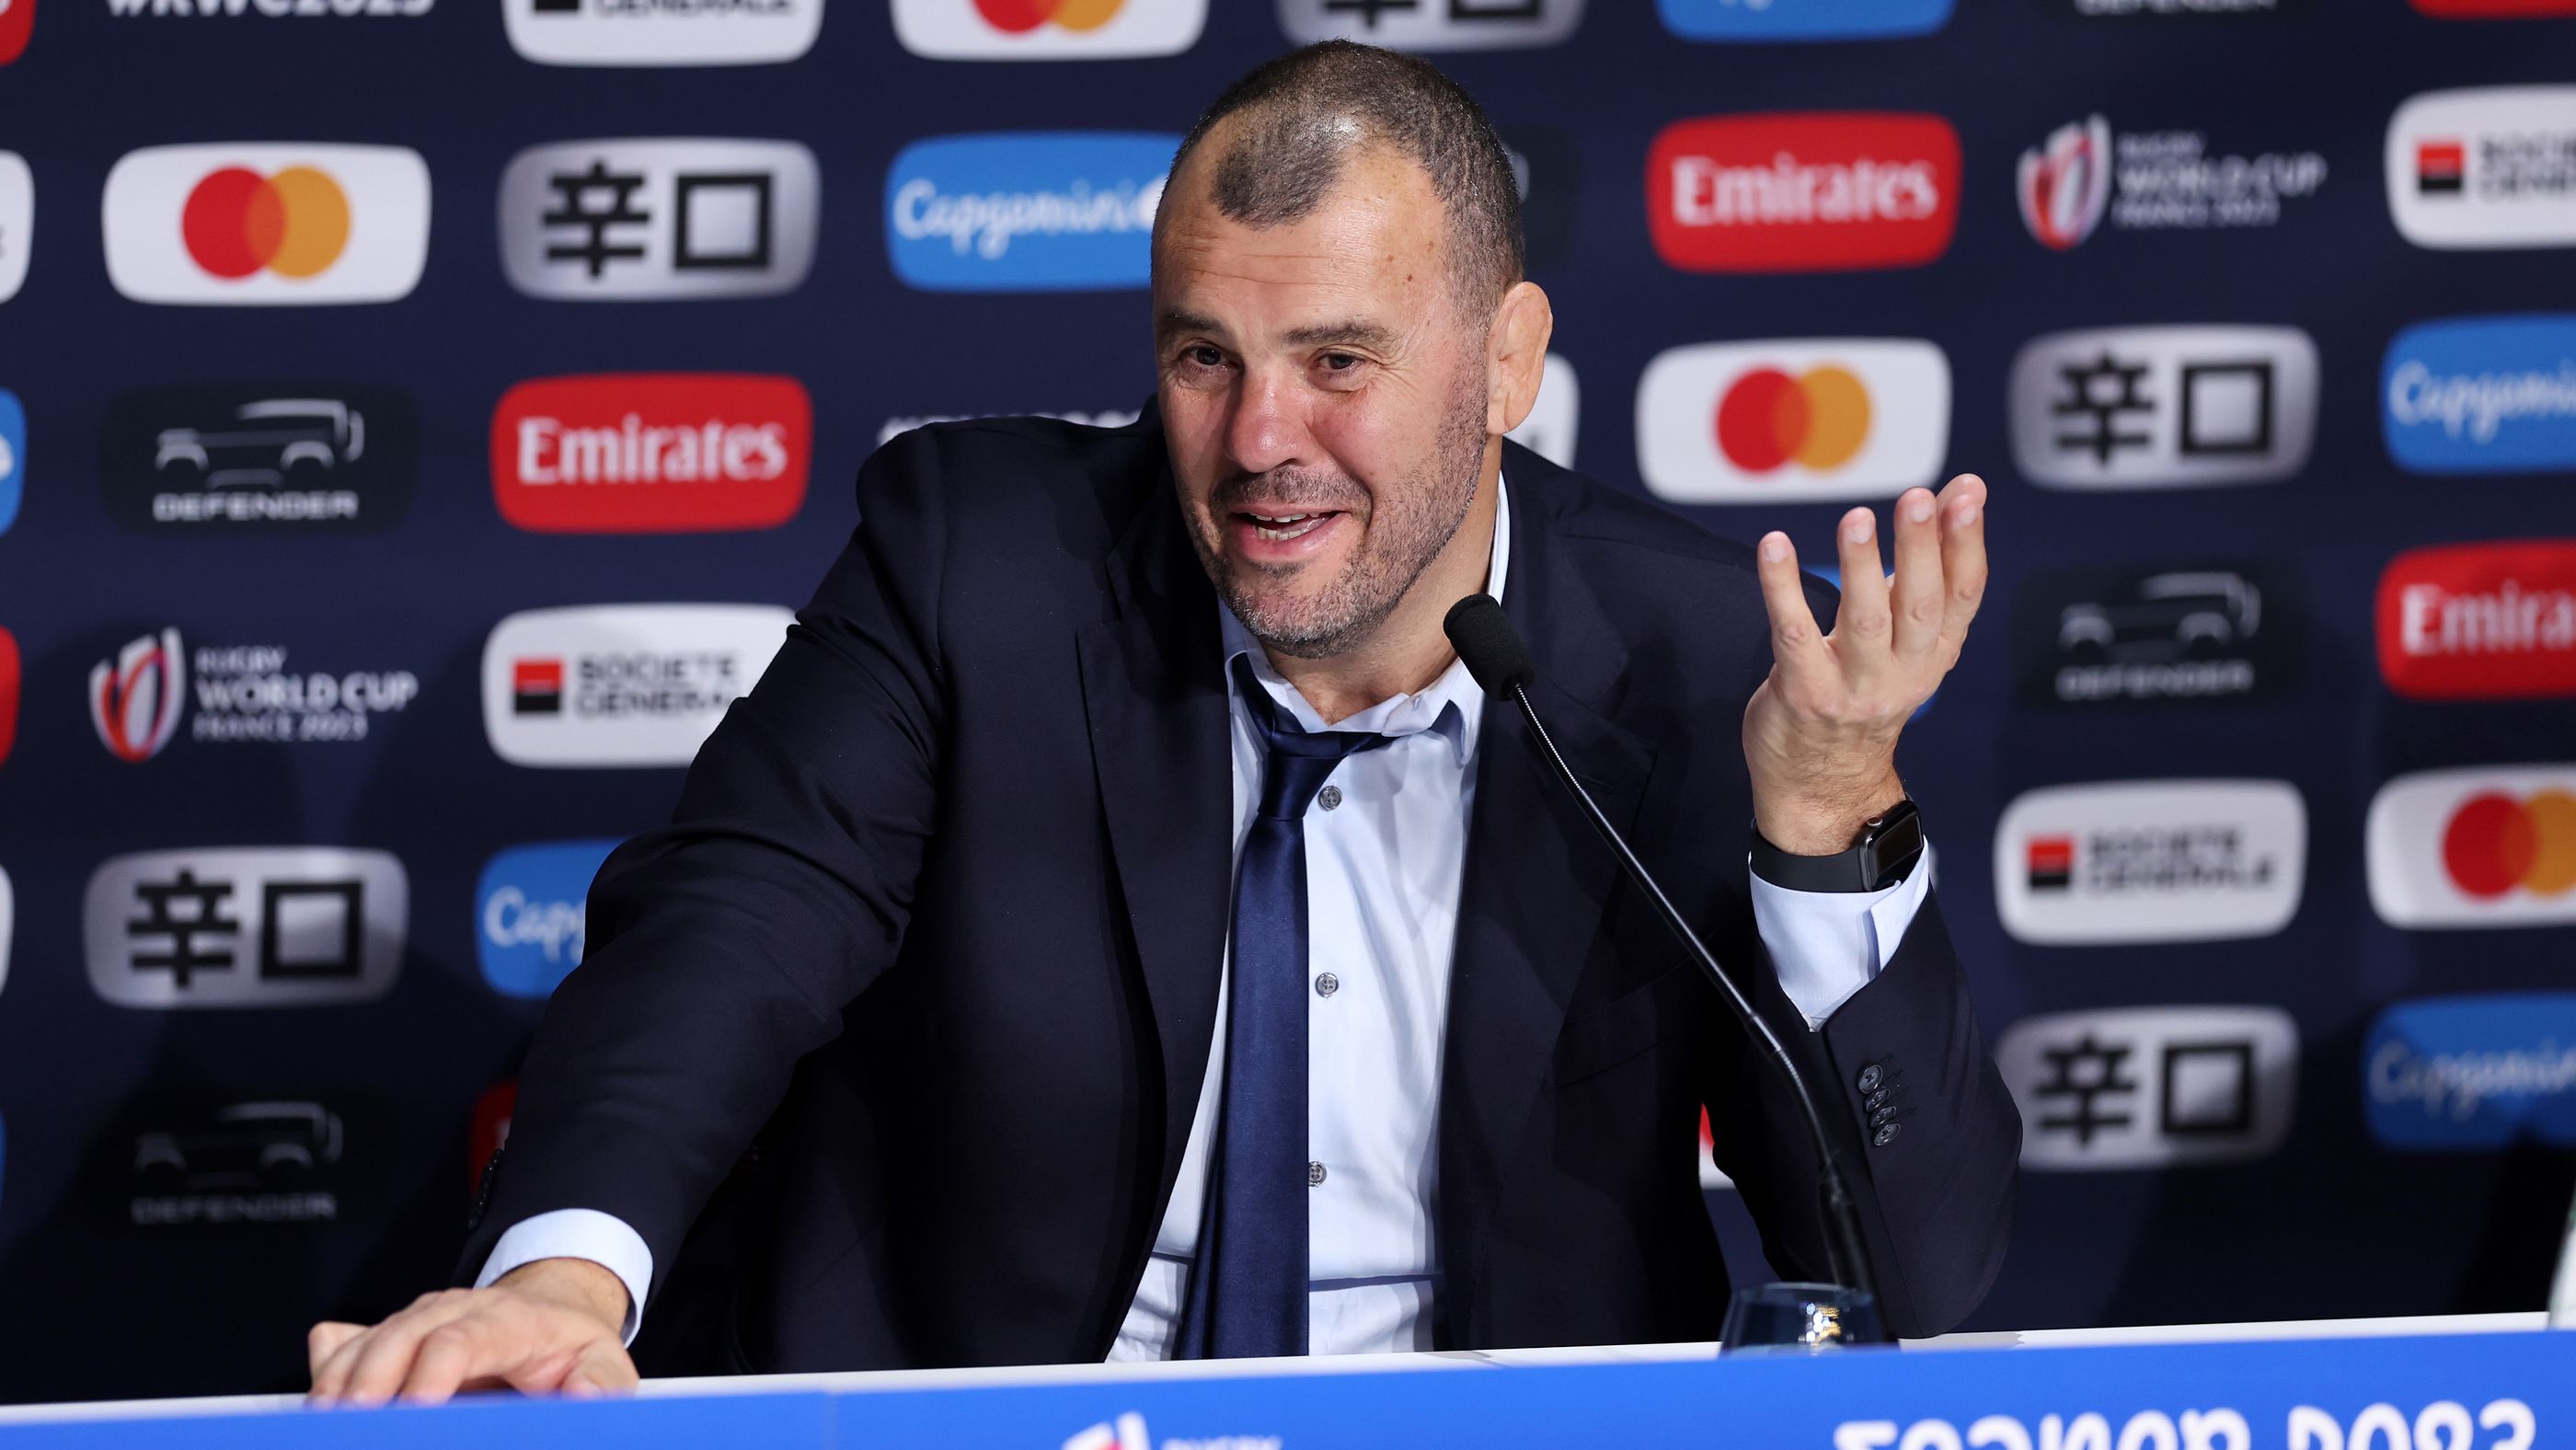 Michael Cheika speaks to the media at Stade de France.